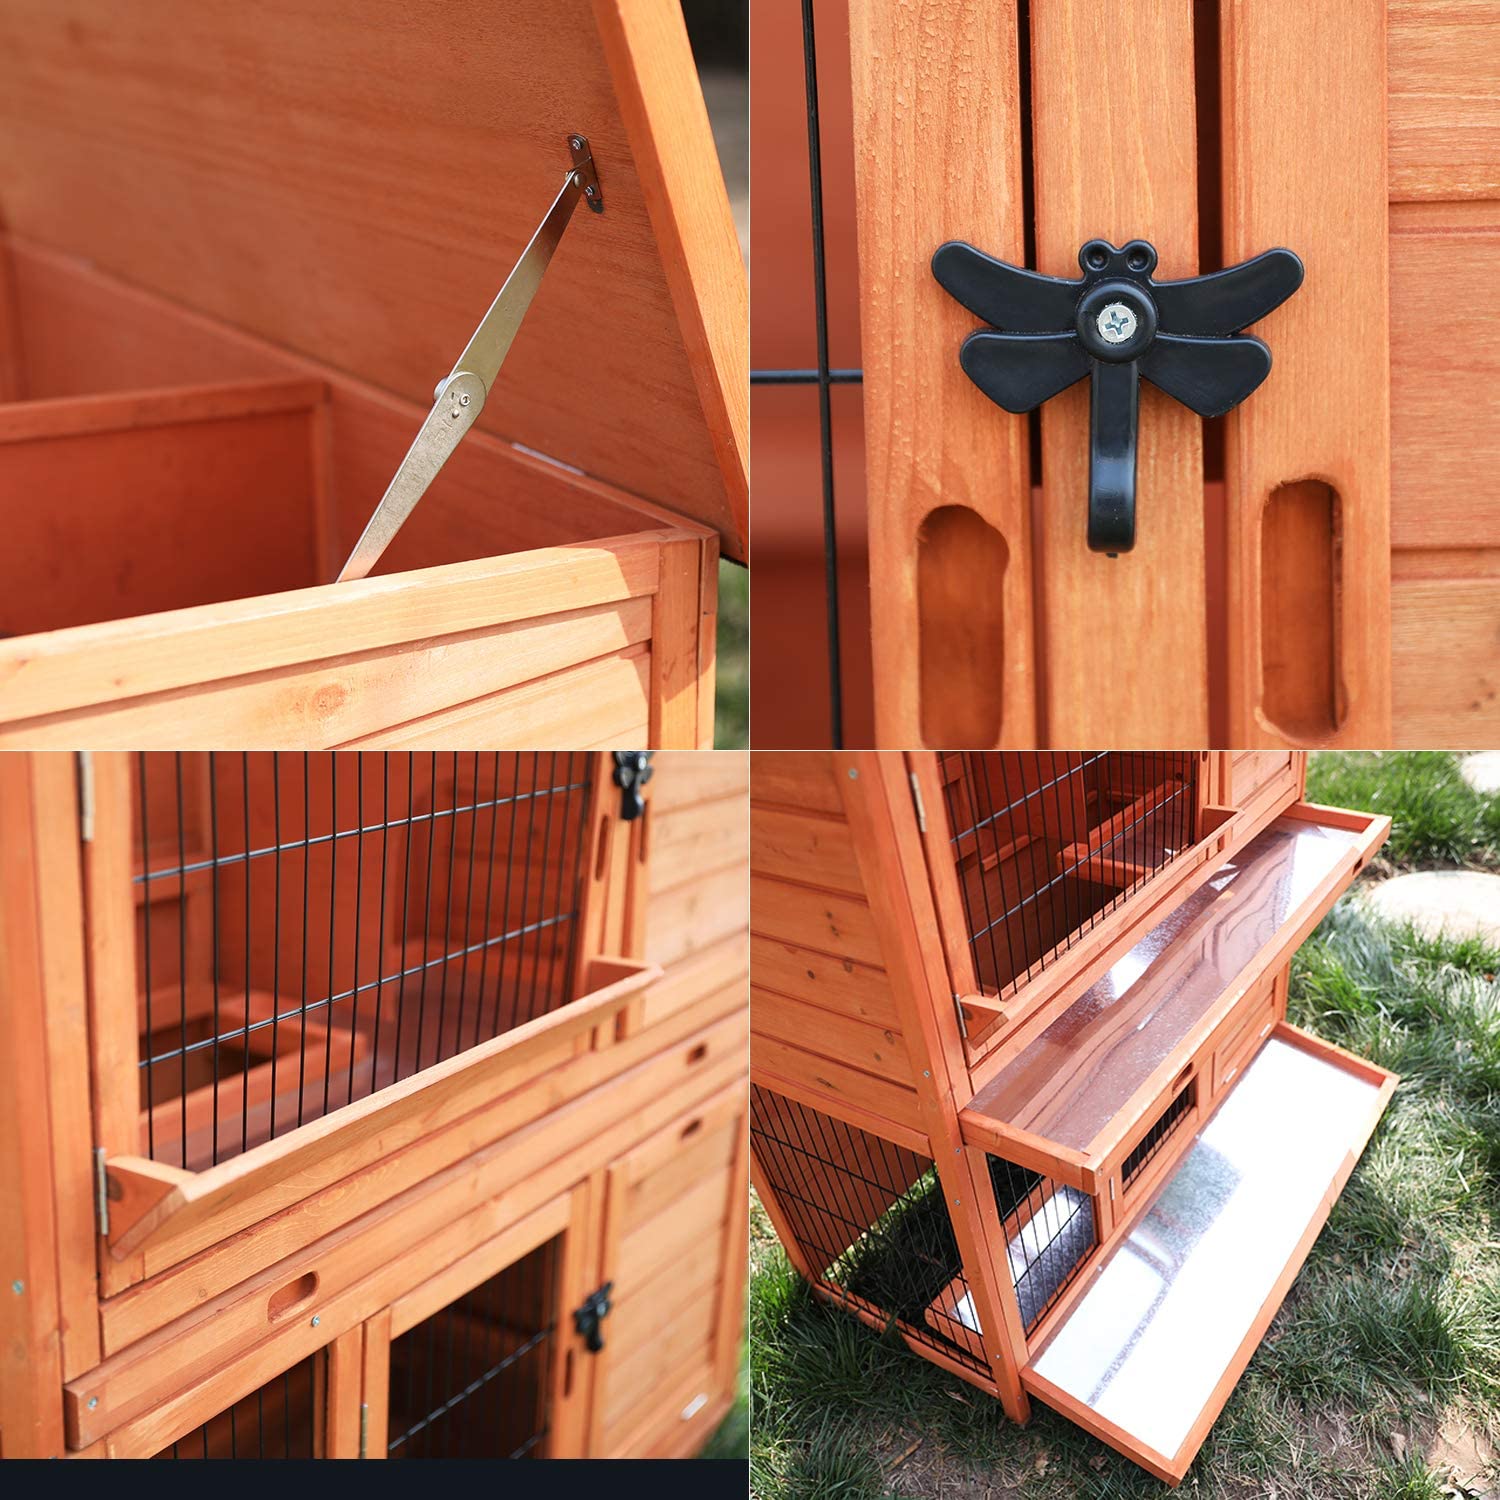 LAZY BUDDY Rabbit Hutch Wooden Rabbit Cage Indoor Outdoor Backyard Bunny Small Animal Cage with Waterproof Roof & Removable Tray - image 4 of 7